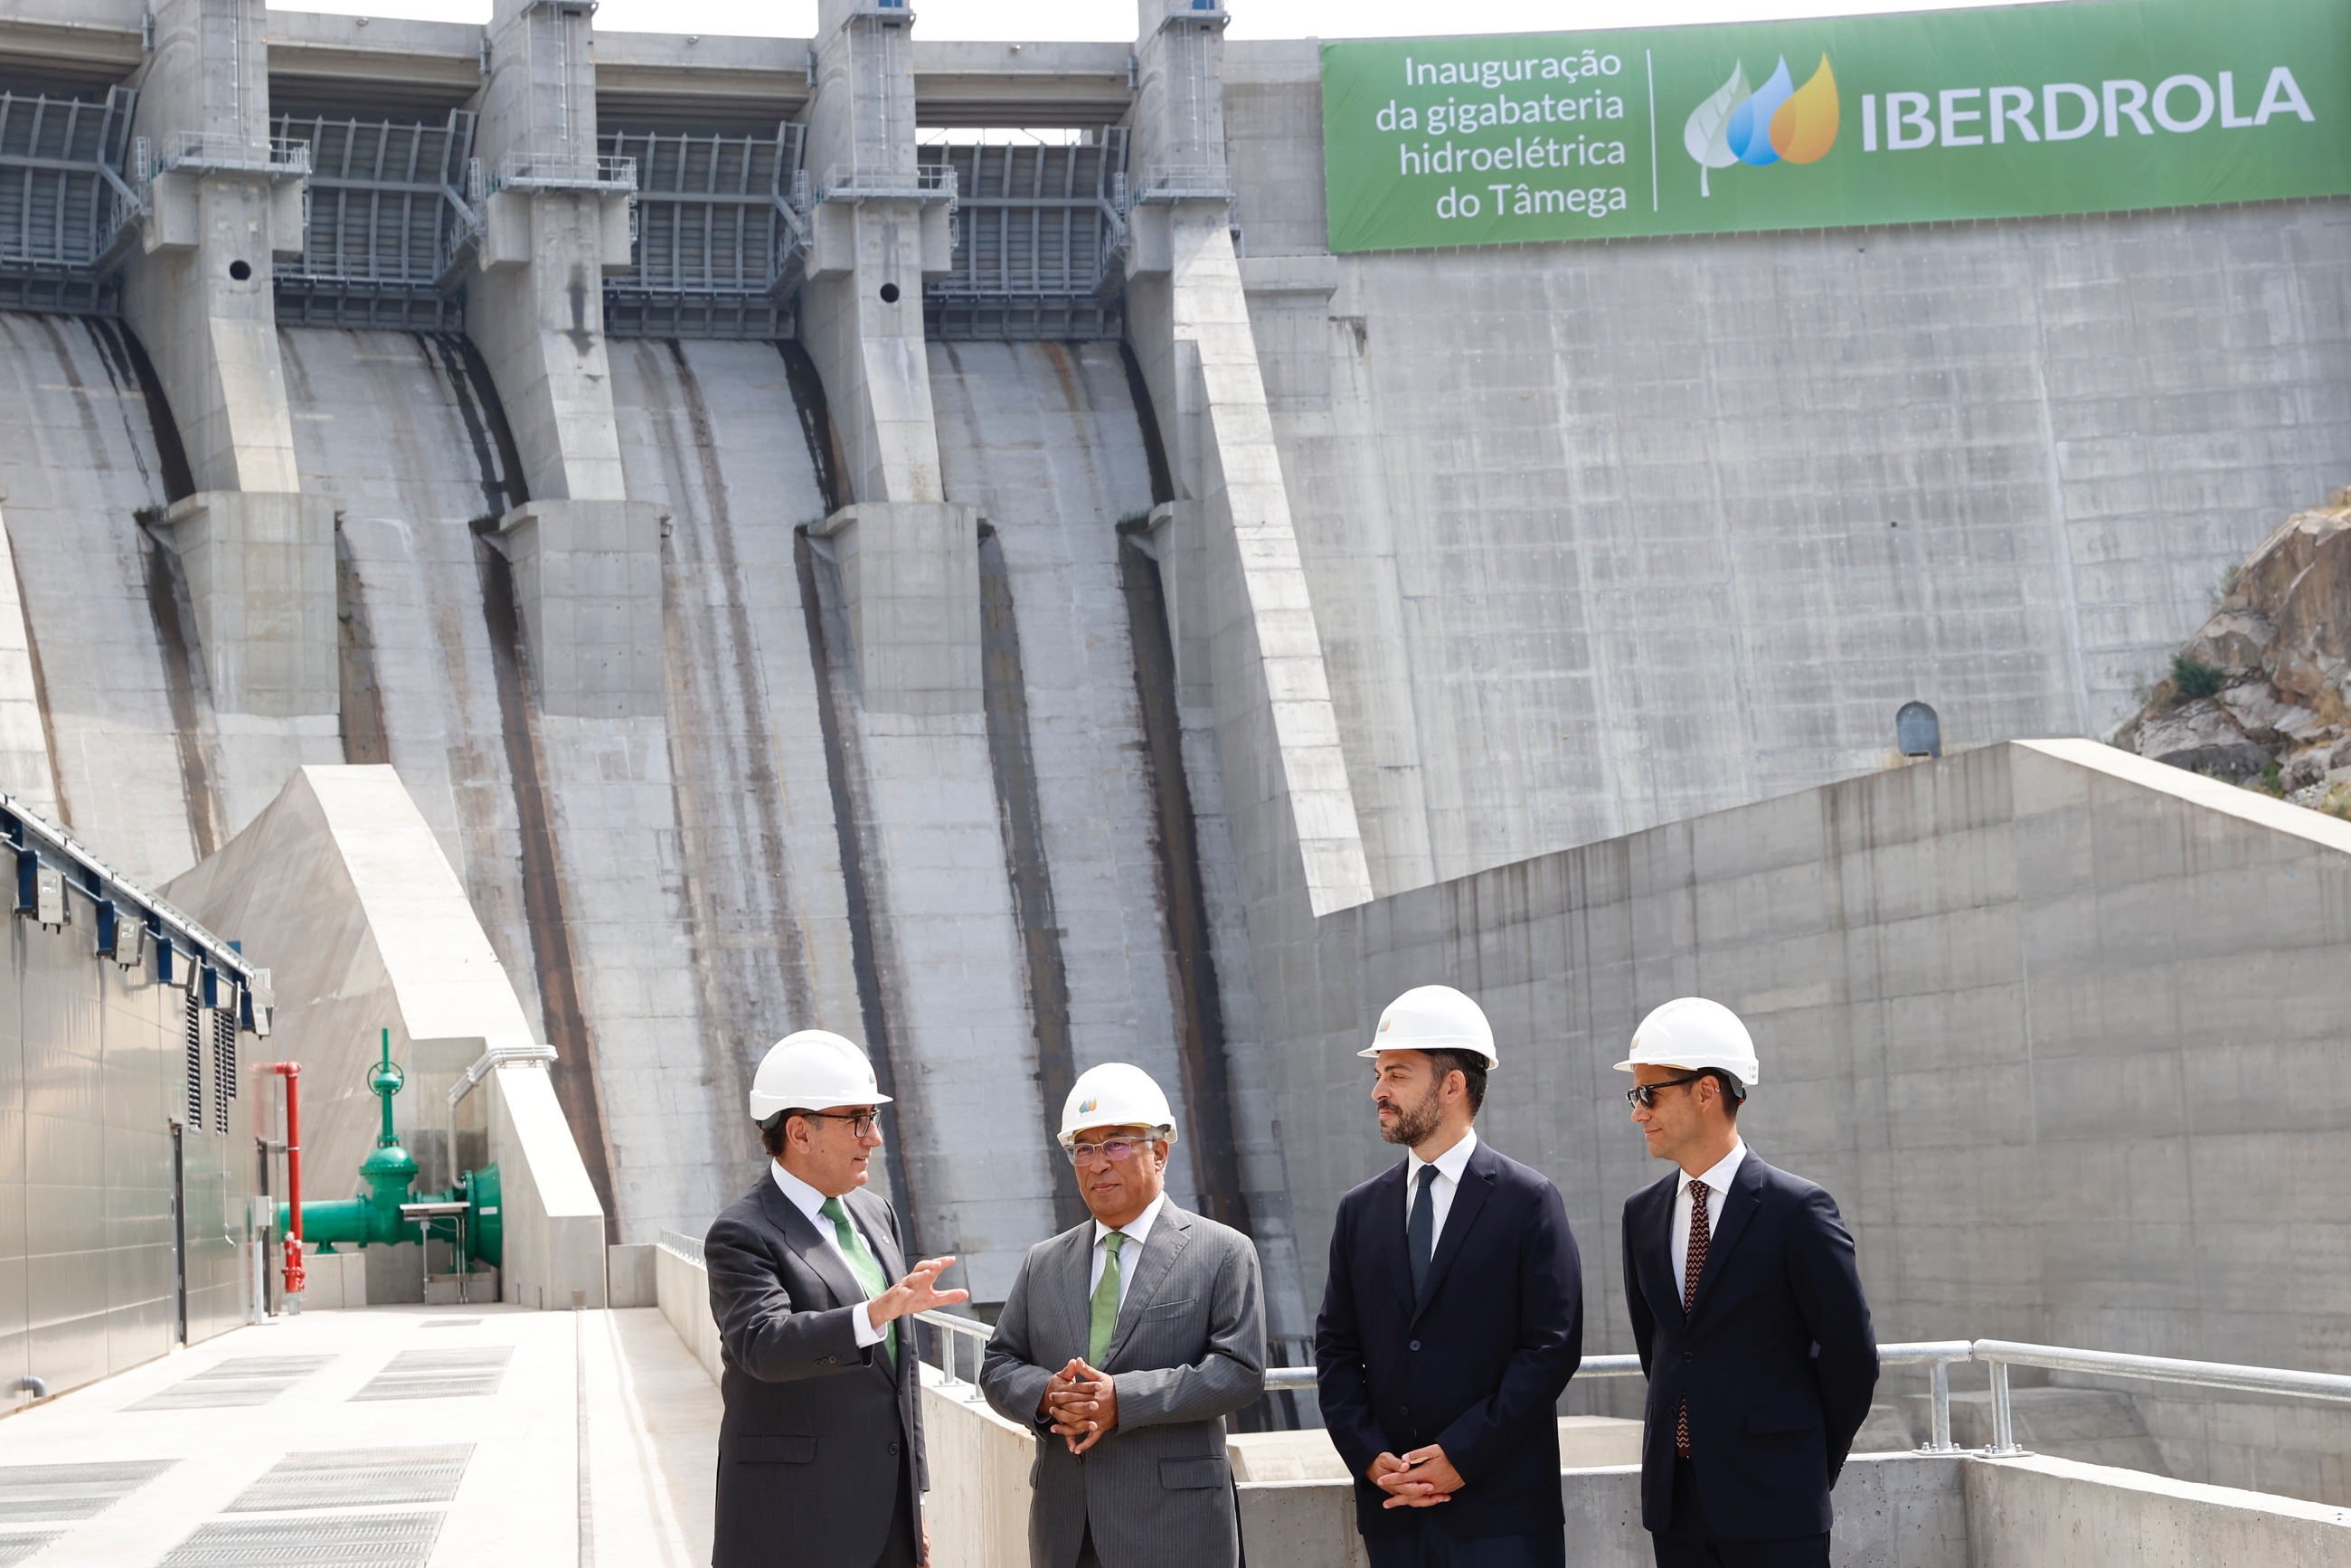 Iberdrola reaffirms its commitment to Portugal, where it will increase investments in the coming years to 3 billion euros for wind farms and solar plants.